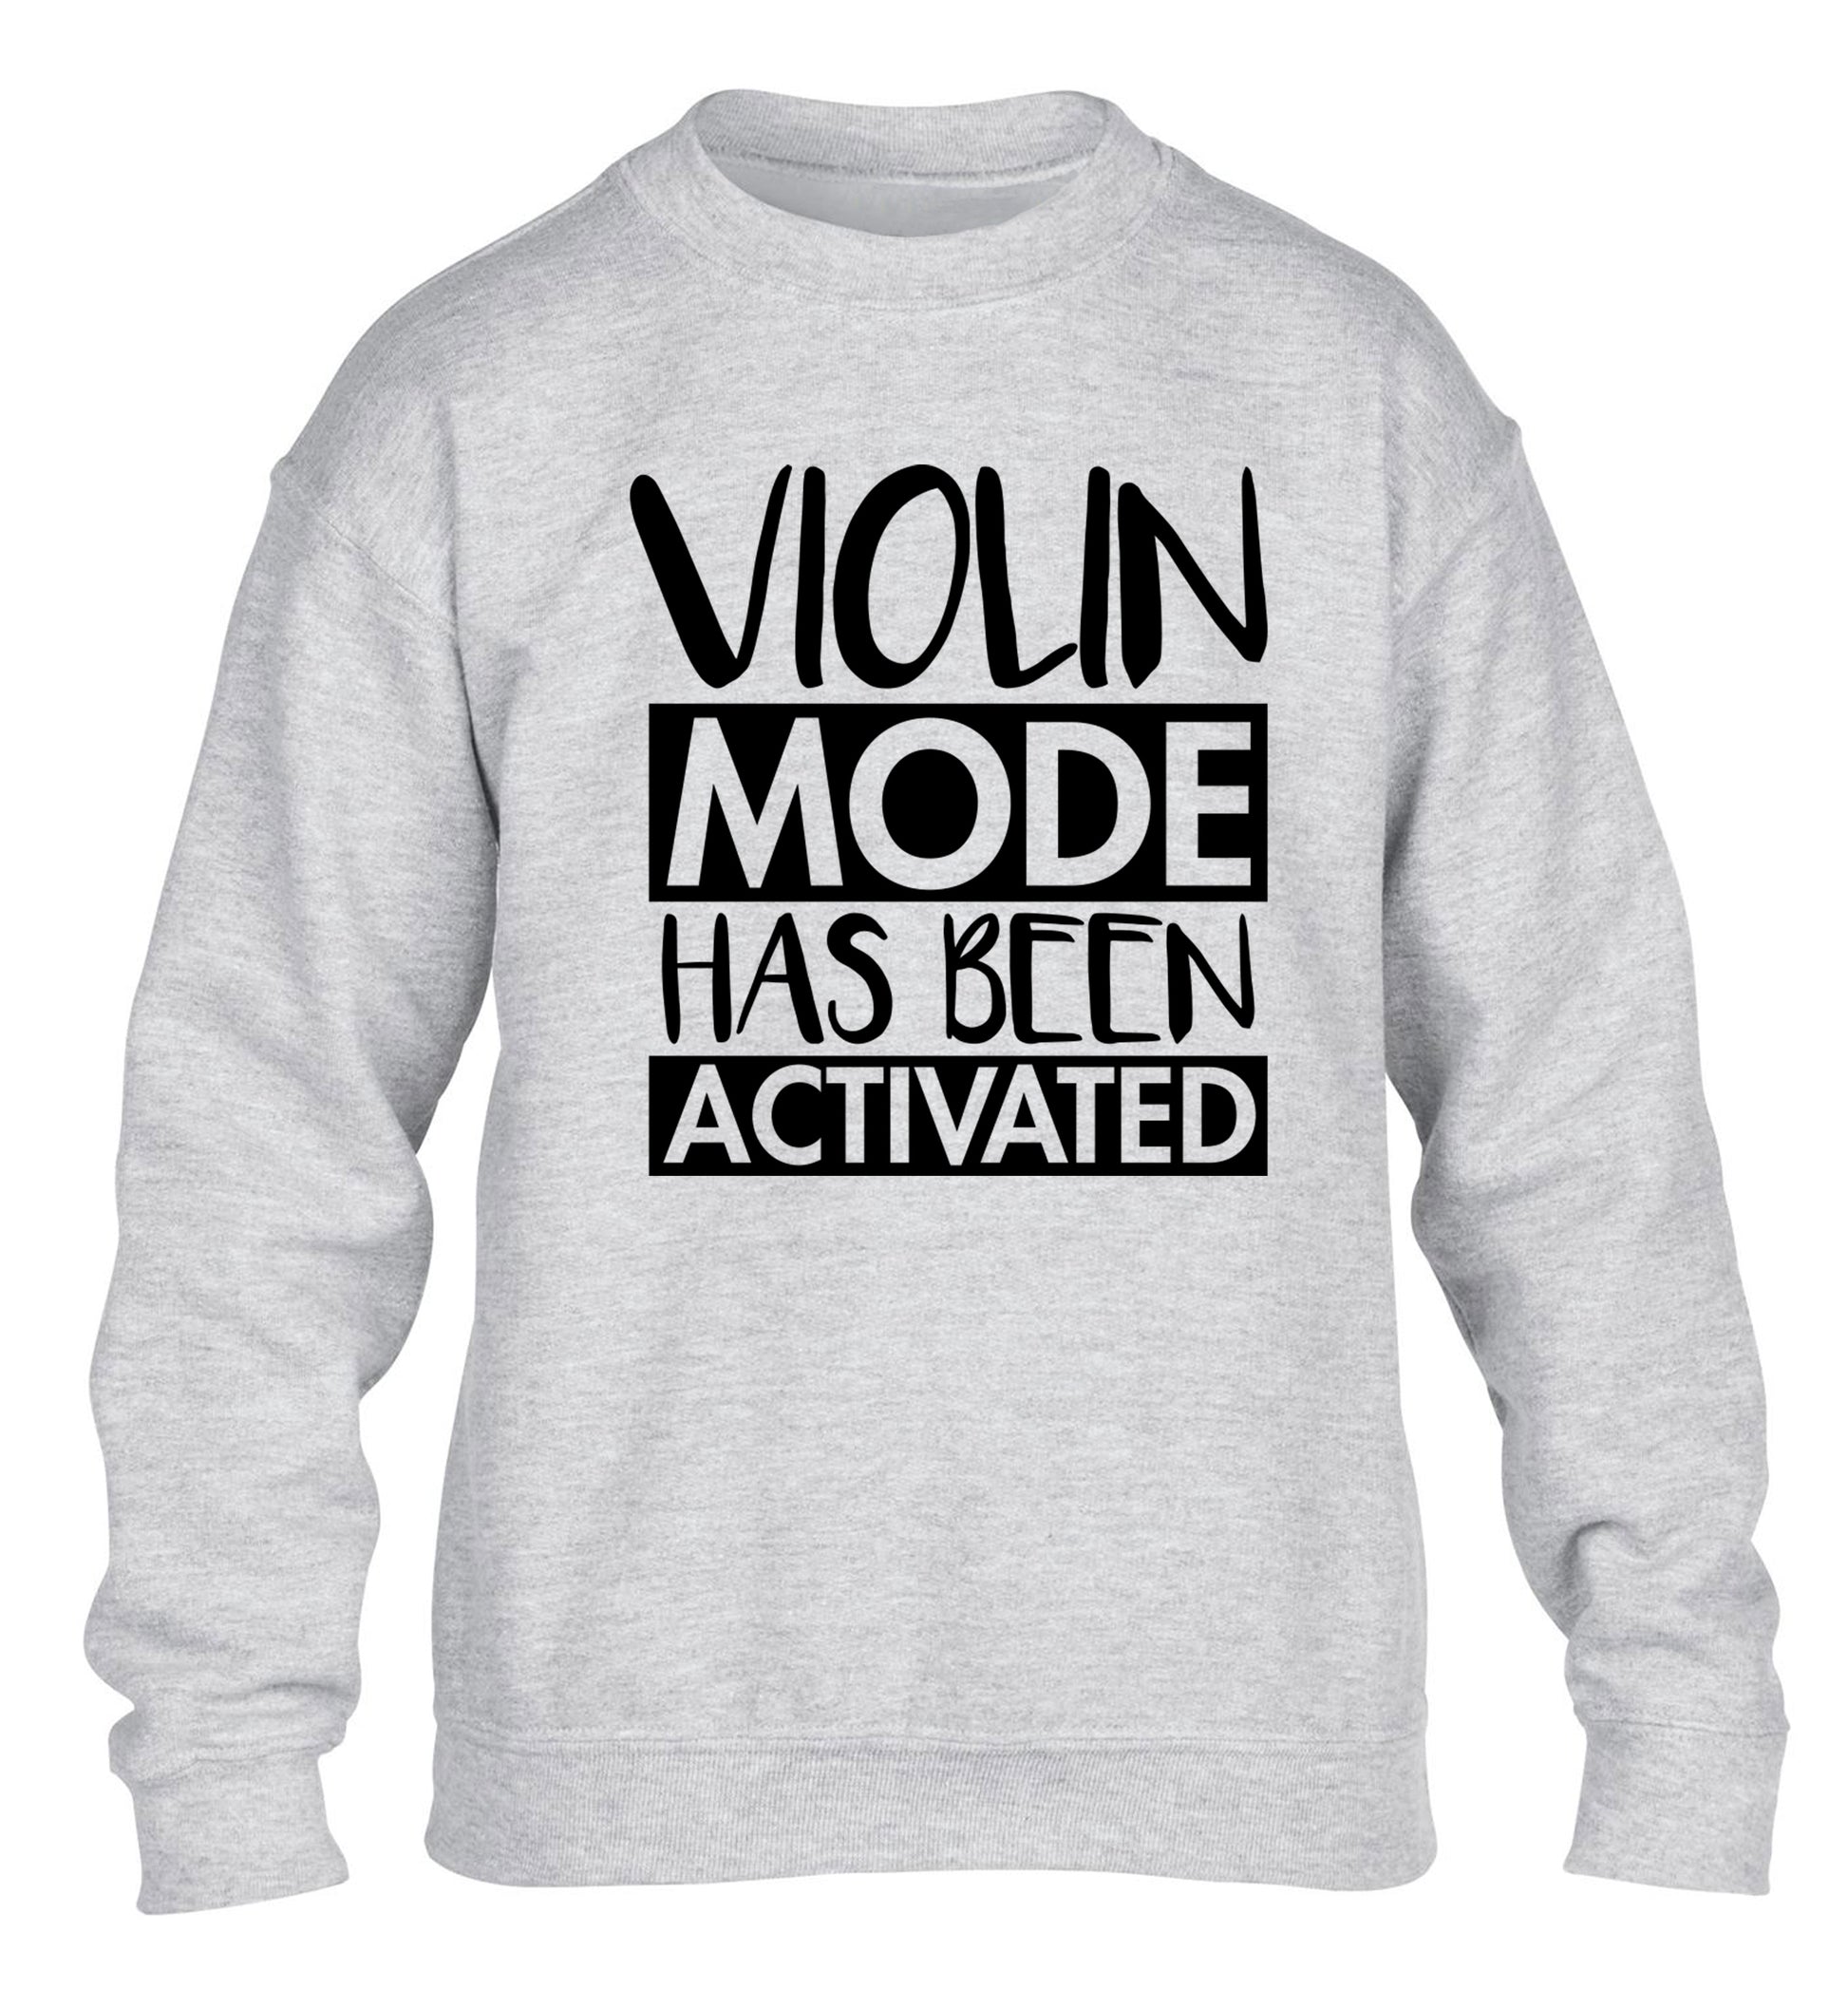 Violin Mode Activated children's grey sweater 12-13 Years